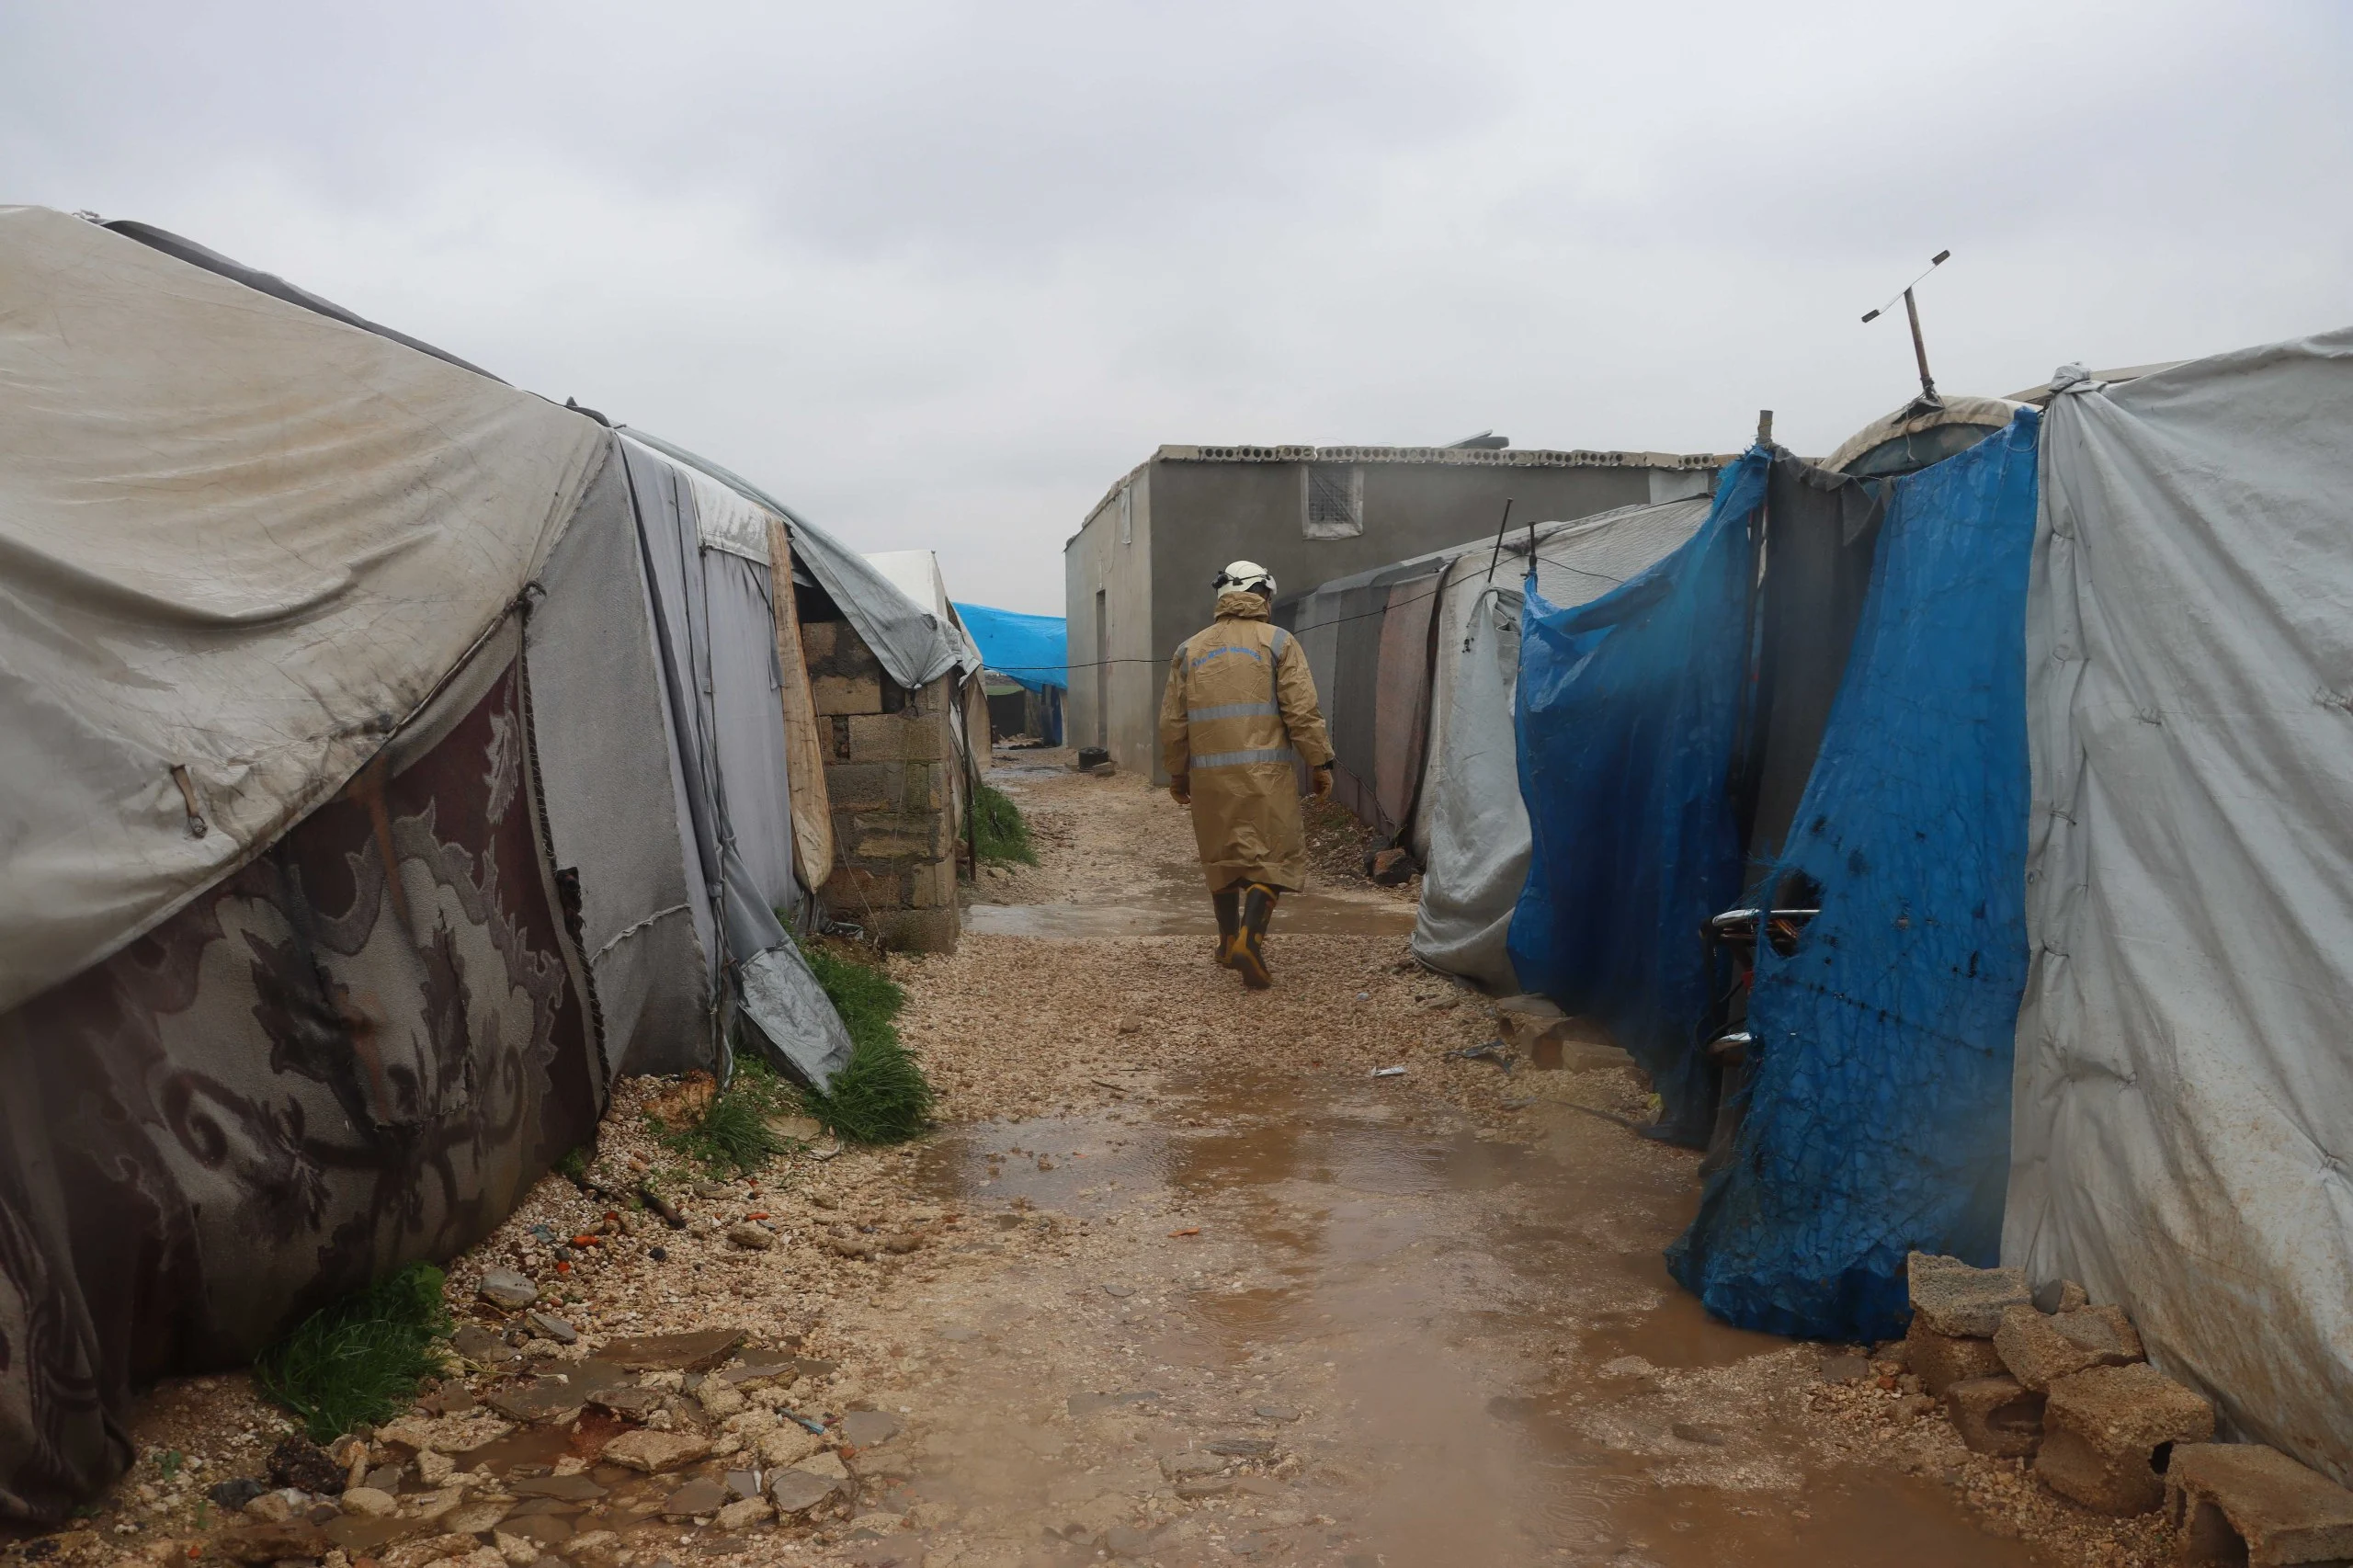 On Jan 30, heavy rainfall caused material damage in IDP camps in Marea town, N. Aleppo, with the resulting muddy rainwater entering 50 tents, causing some moderate, partial damage to them.